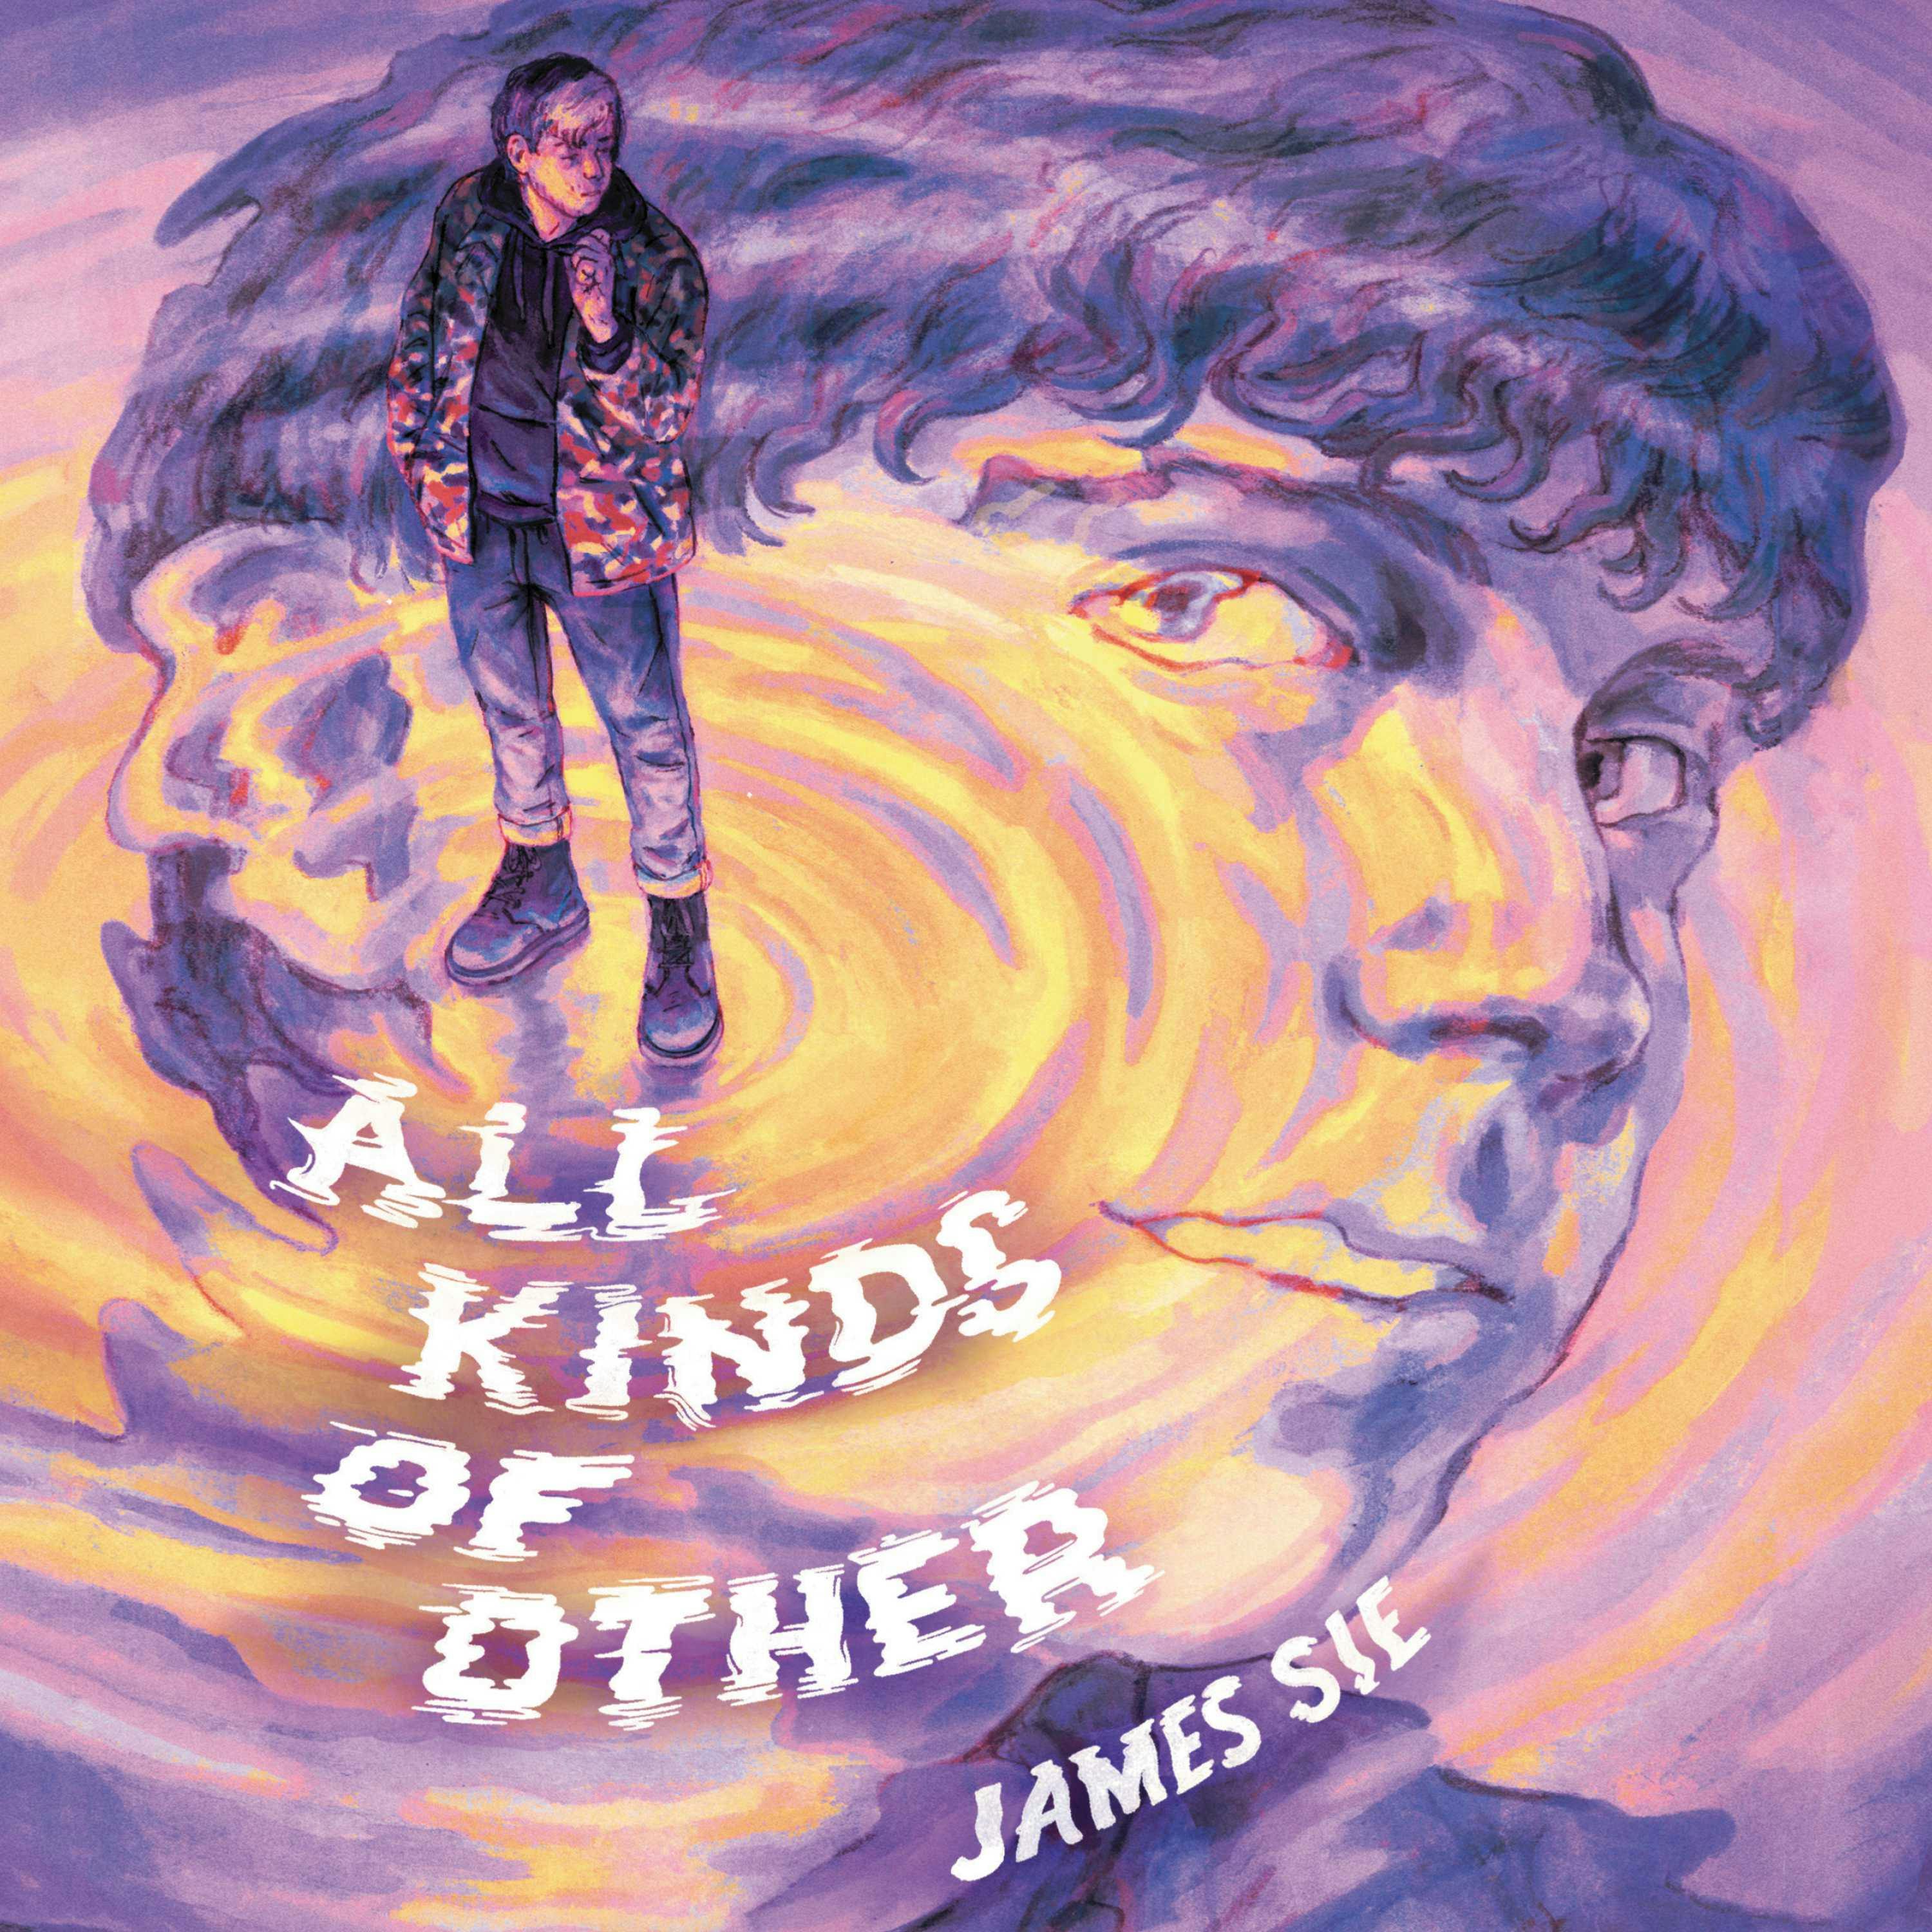 All Kinds of Other - James Sie